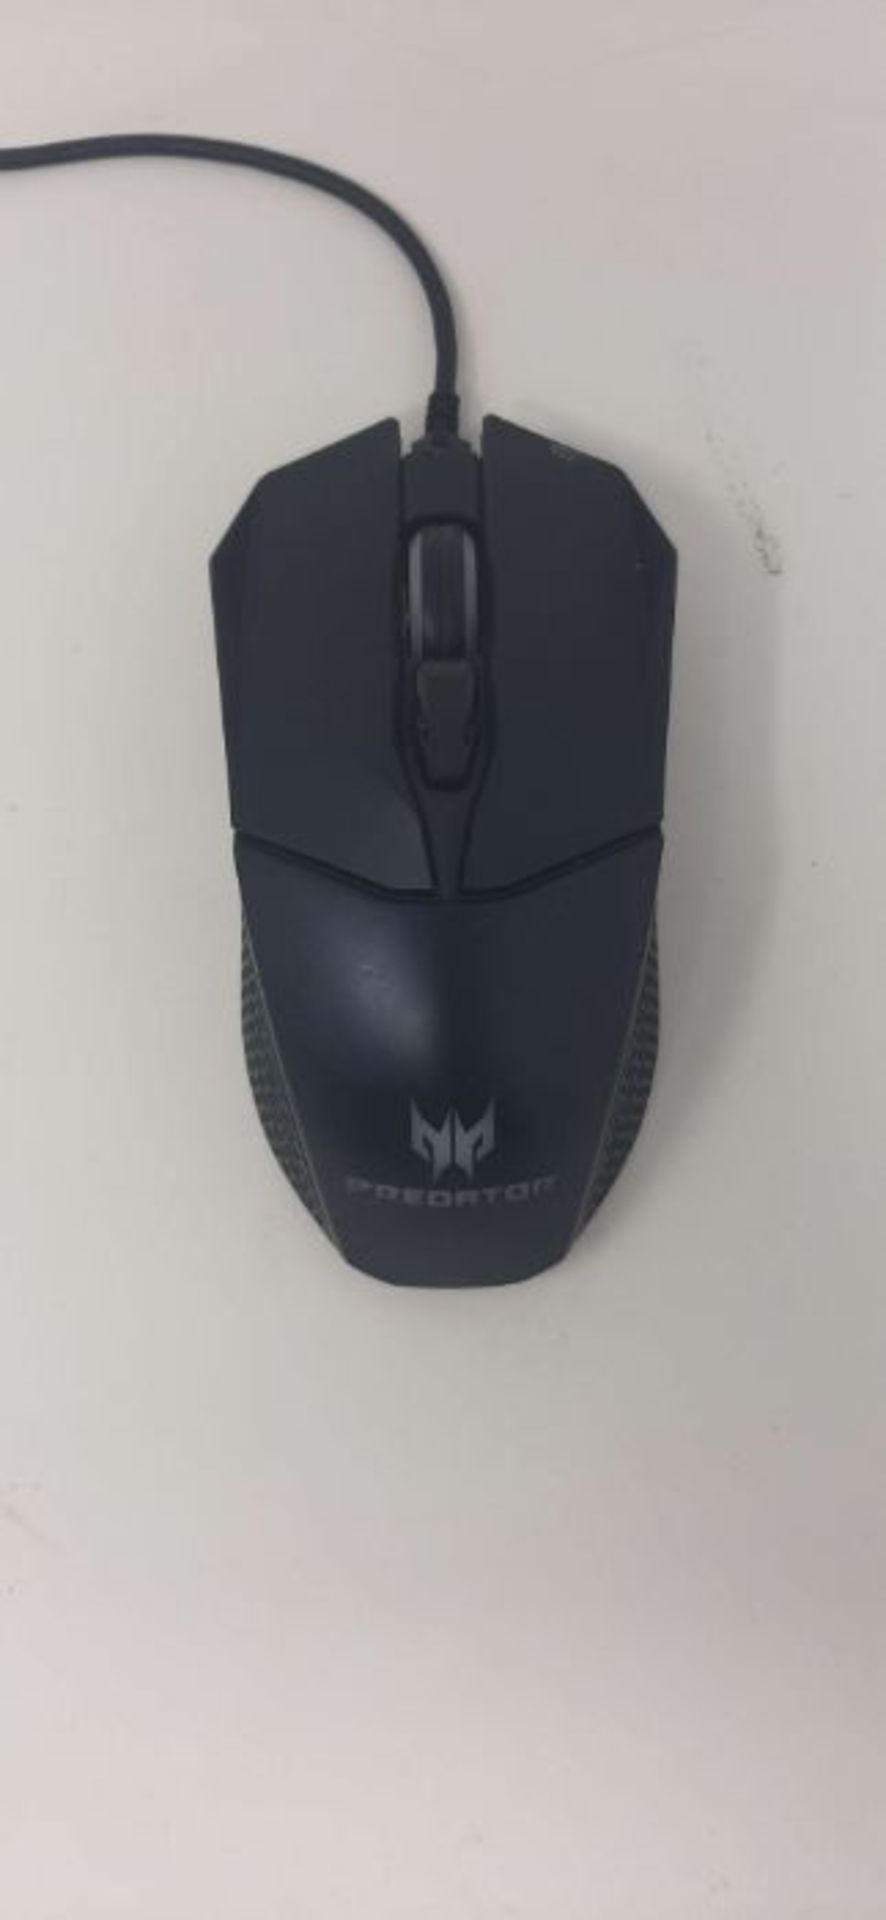 CESTUS 300 GAMING MOUSE - Image 2 of 2